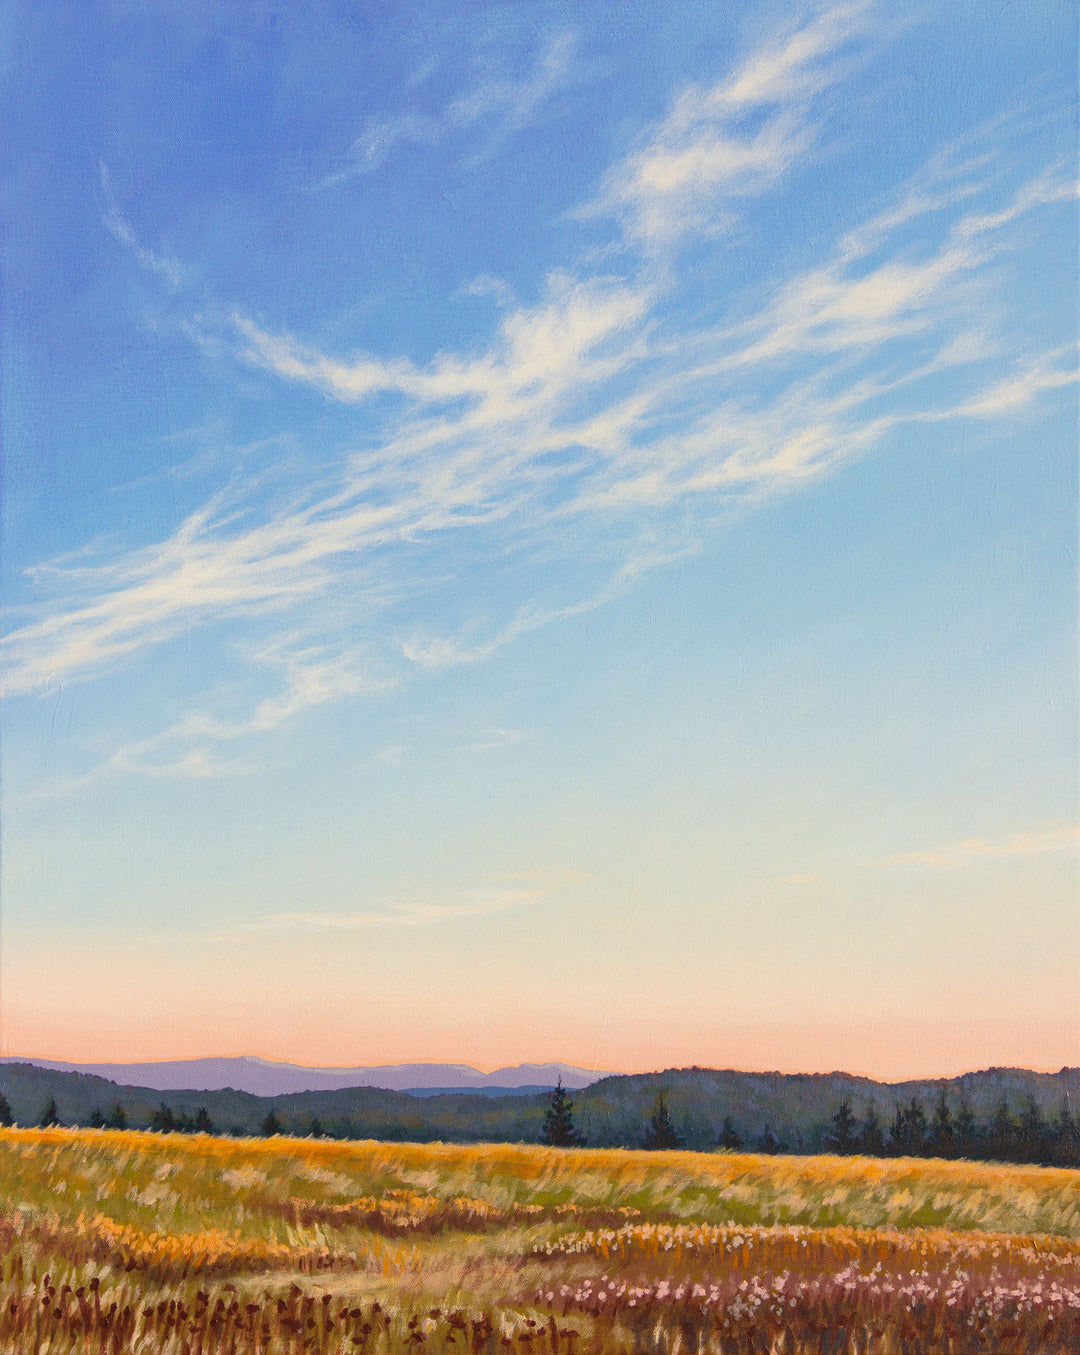 Painting of an evening sky with mountains in the distance and fields in the foreground.